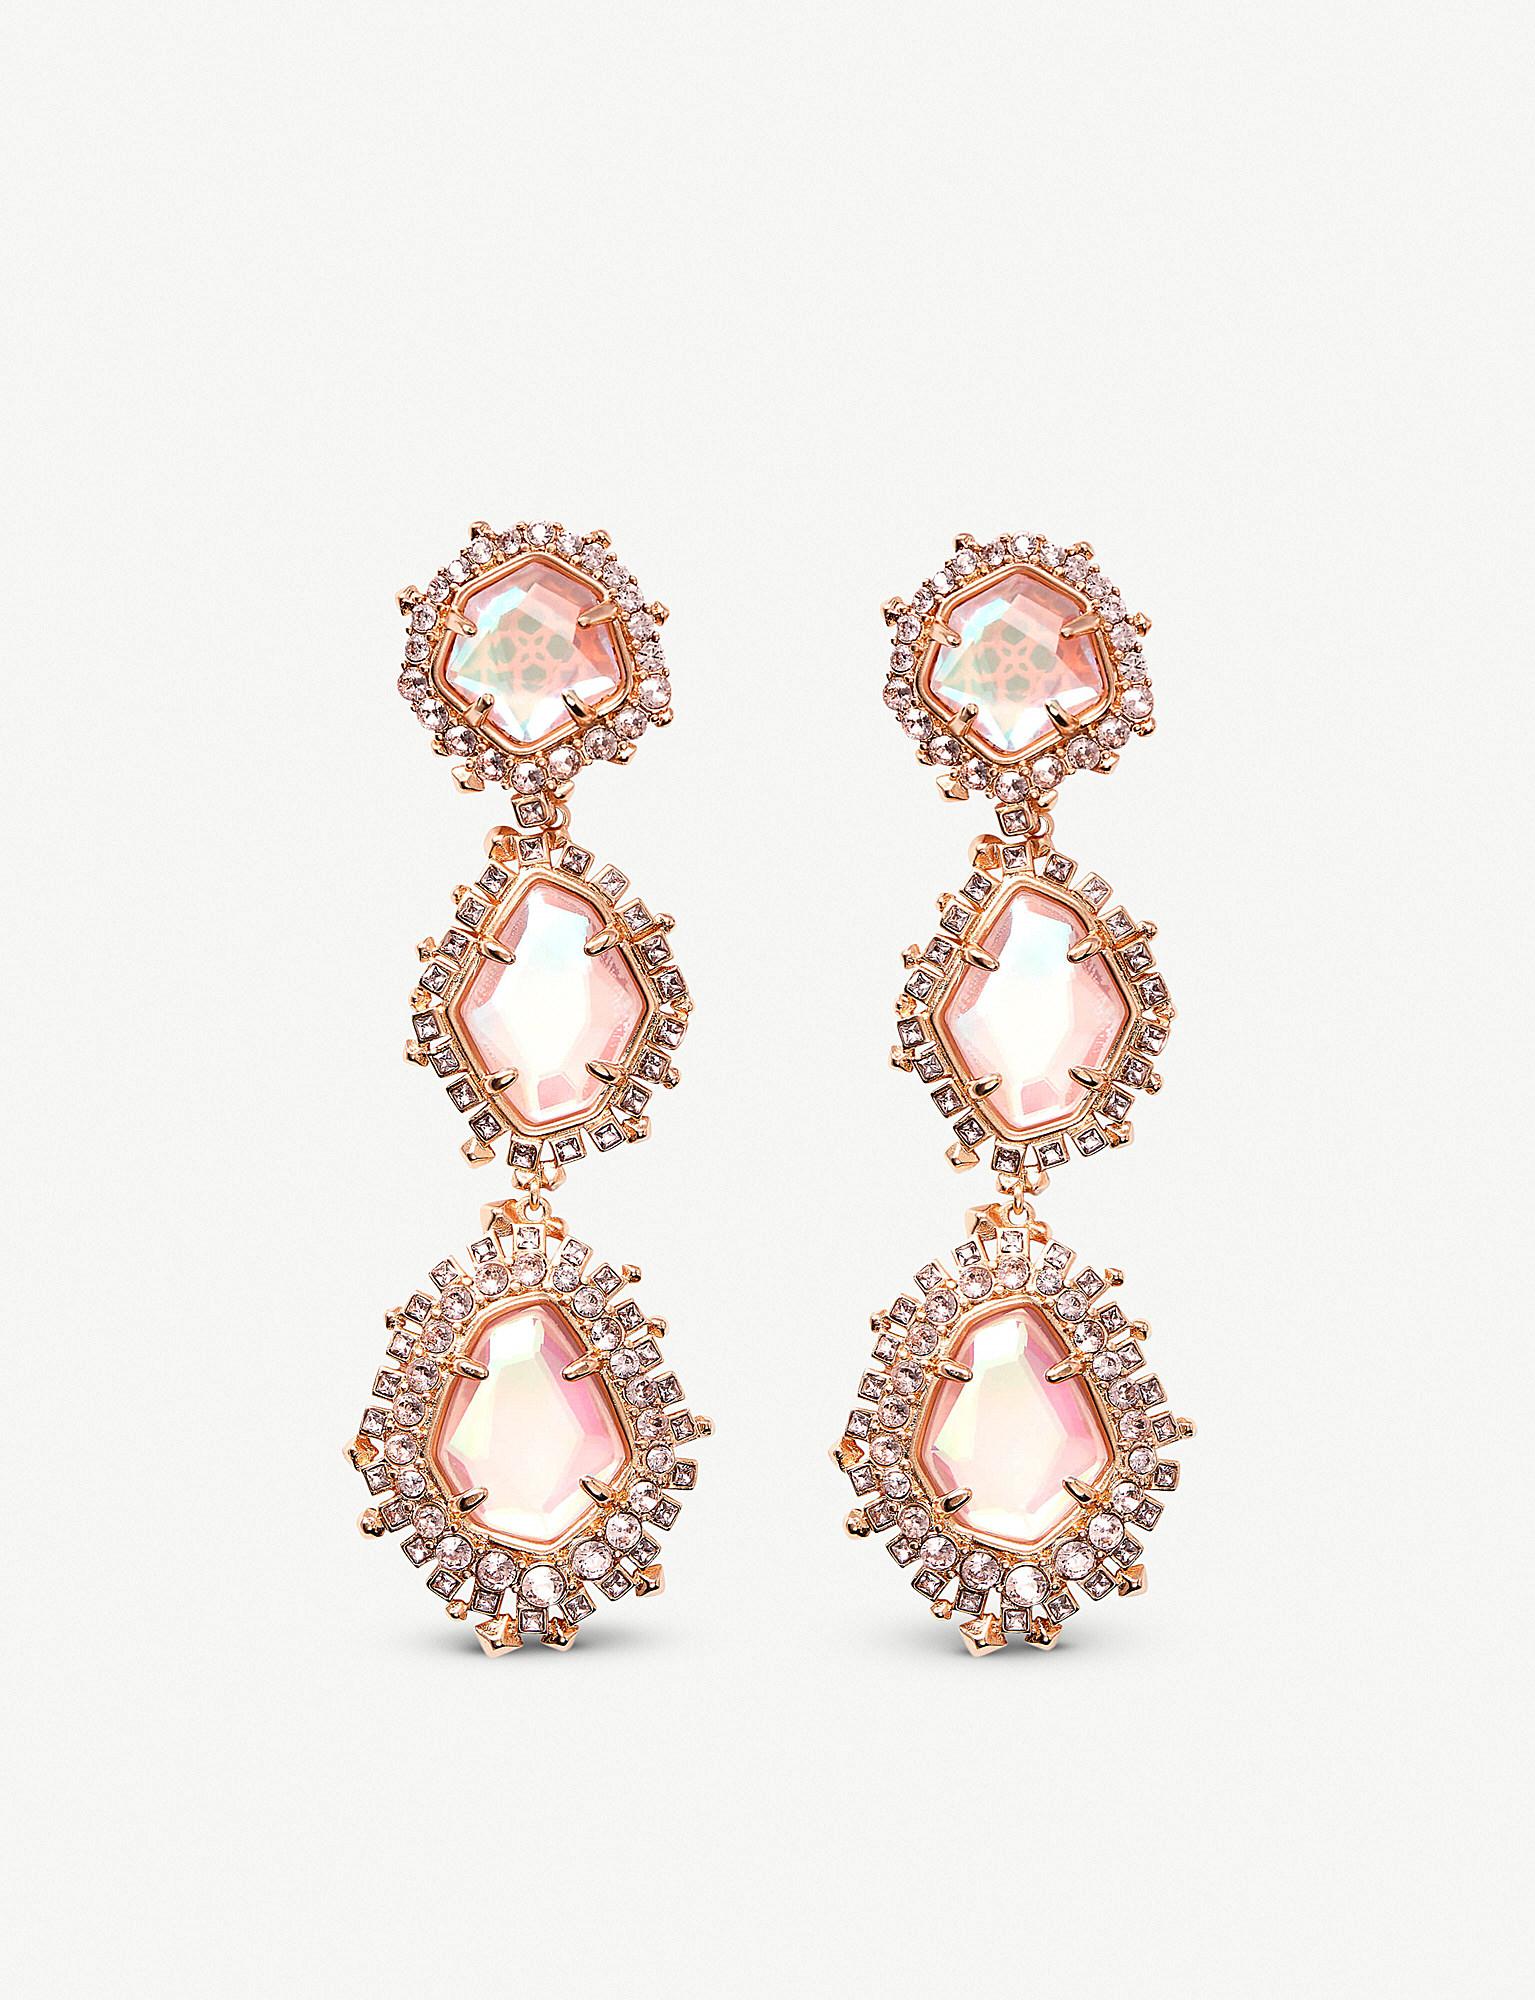 Lyst - Kendra Scott Aria 14ct Rose-gold Clip-on Earrings